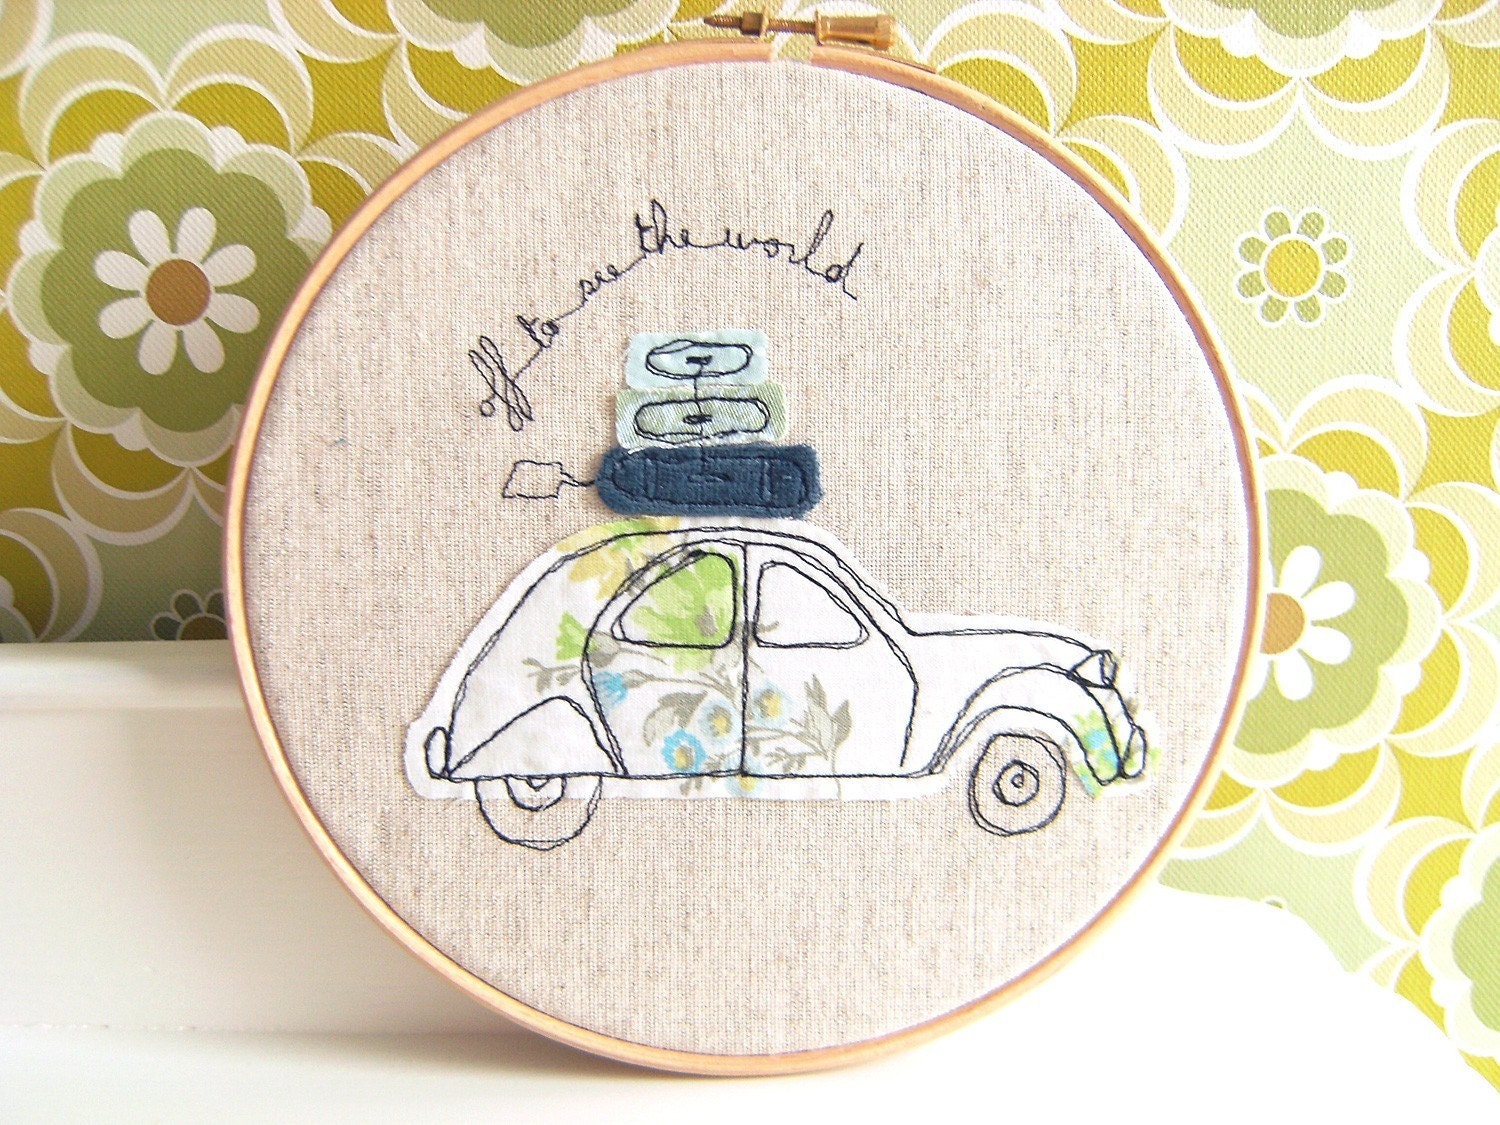 Embroidery Hoop Art - 'Off to see the world' Textile illustration of a French 2CV car in blue & green - 8" hoop